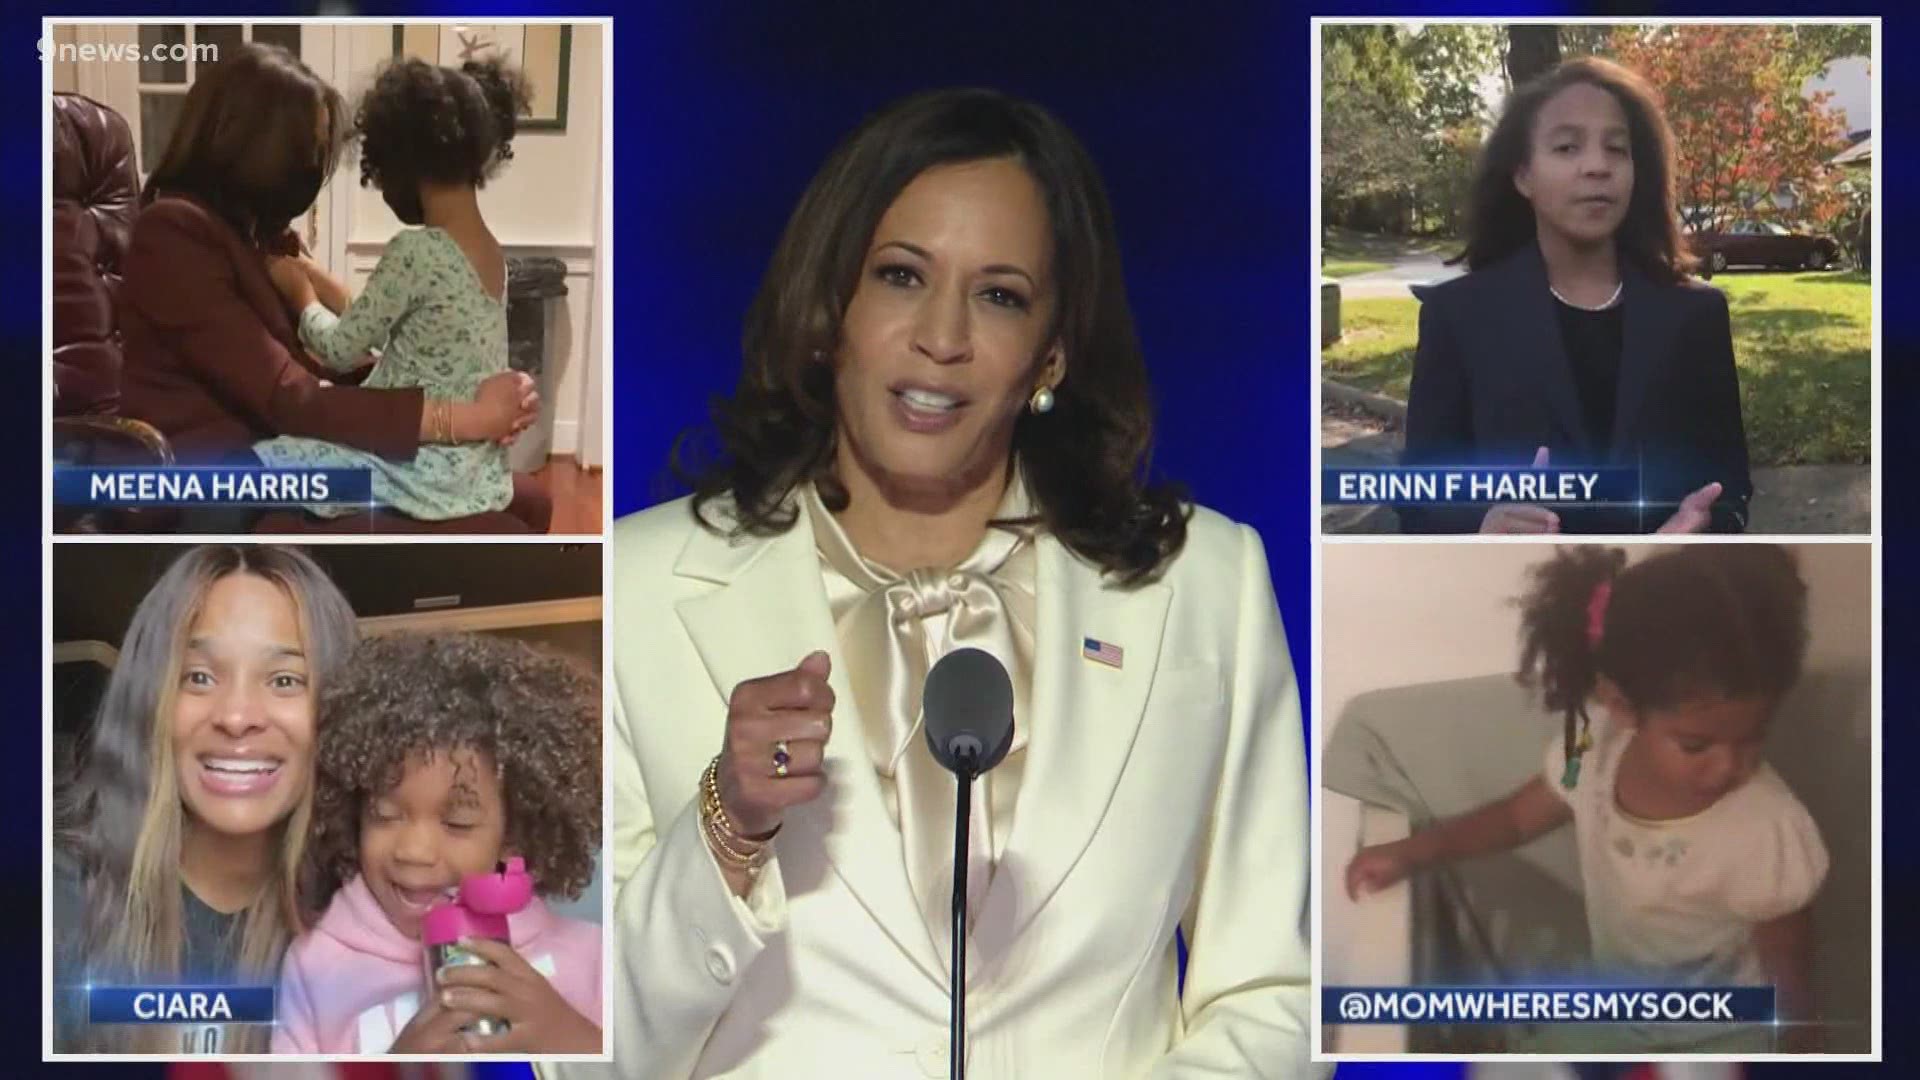 Senator Kamala Harris is making history as Vice-President elect. Doctor Rosemarie Allen about the historic moment and why representation is so important.